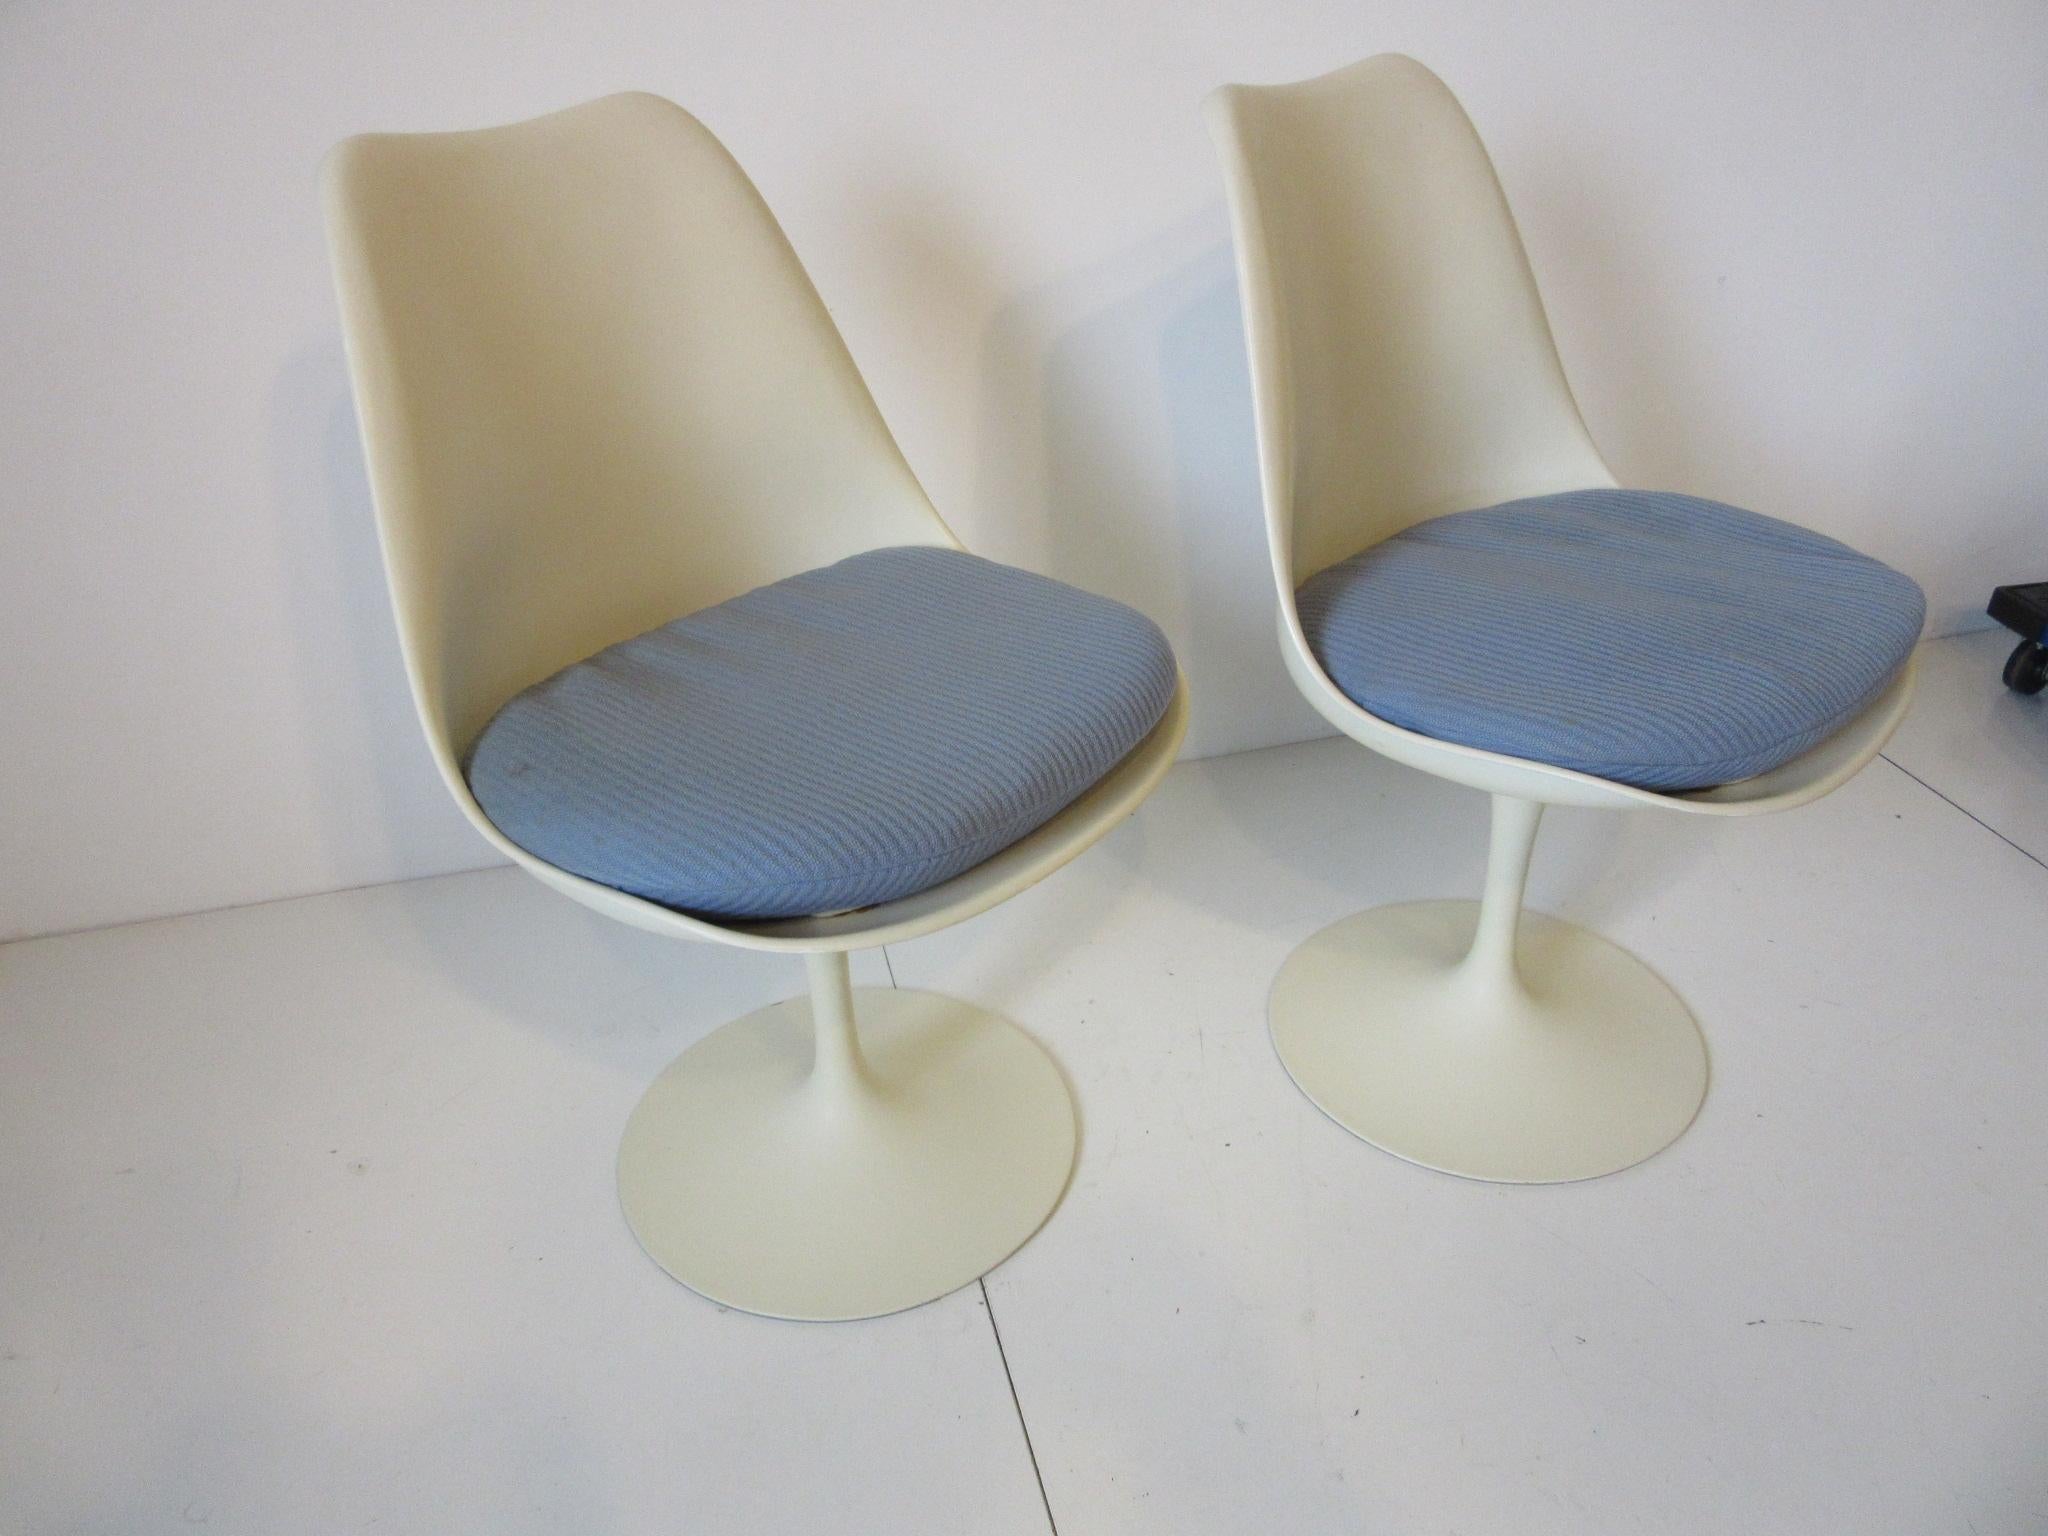 A pair of swiveling tulip chairs with sky blue fabric seat pads, perfect for that small eat in kitchen or cafe table manufactured by Knoll International.